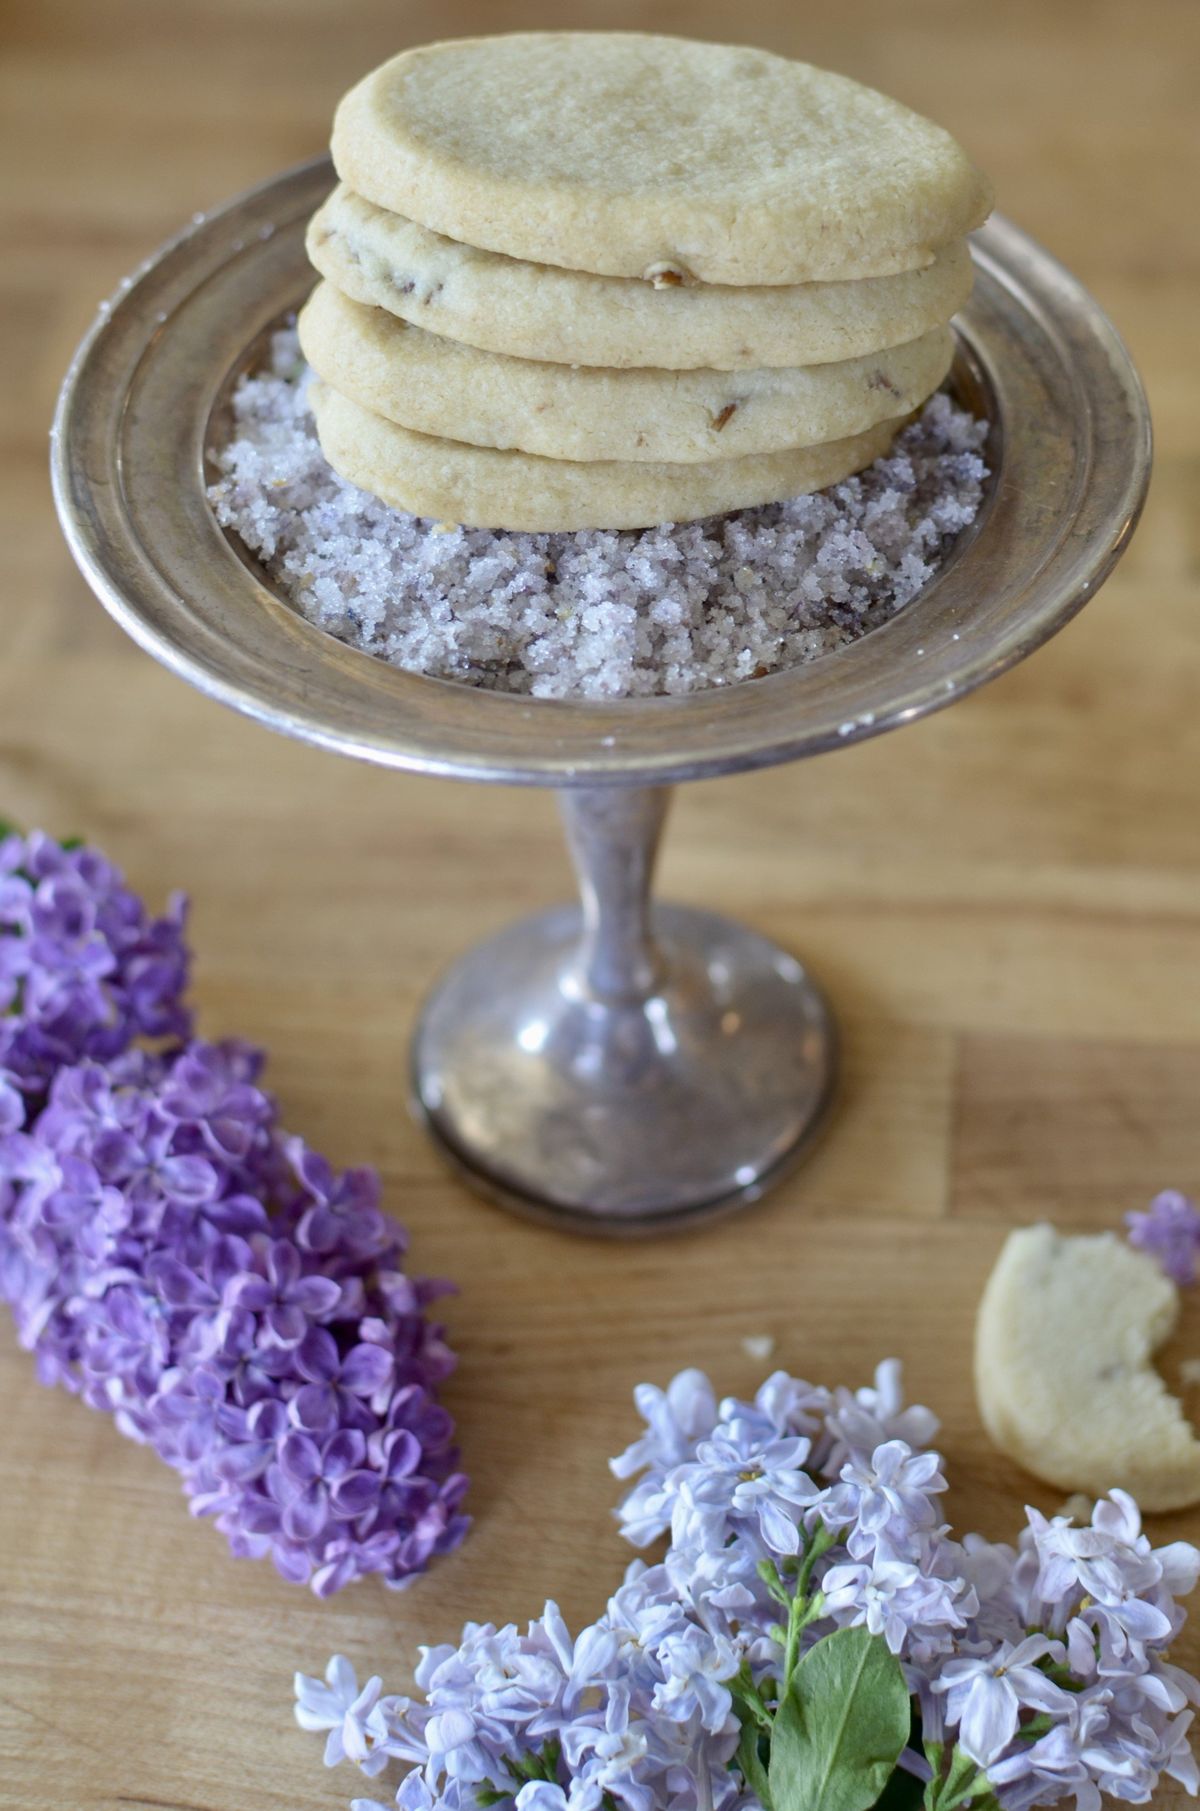 Capture the scent of lilac blossoms in these buttery, not-too-sweet shortbread cookies.  (Ricky Webster)